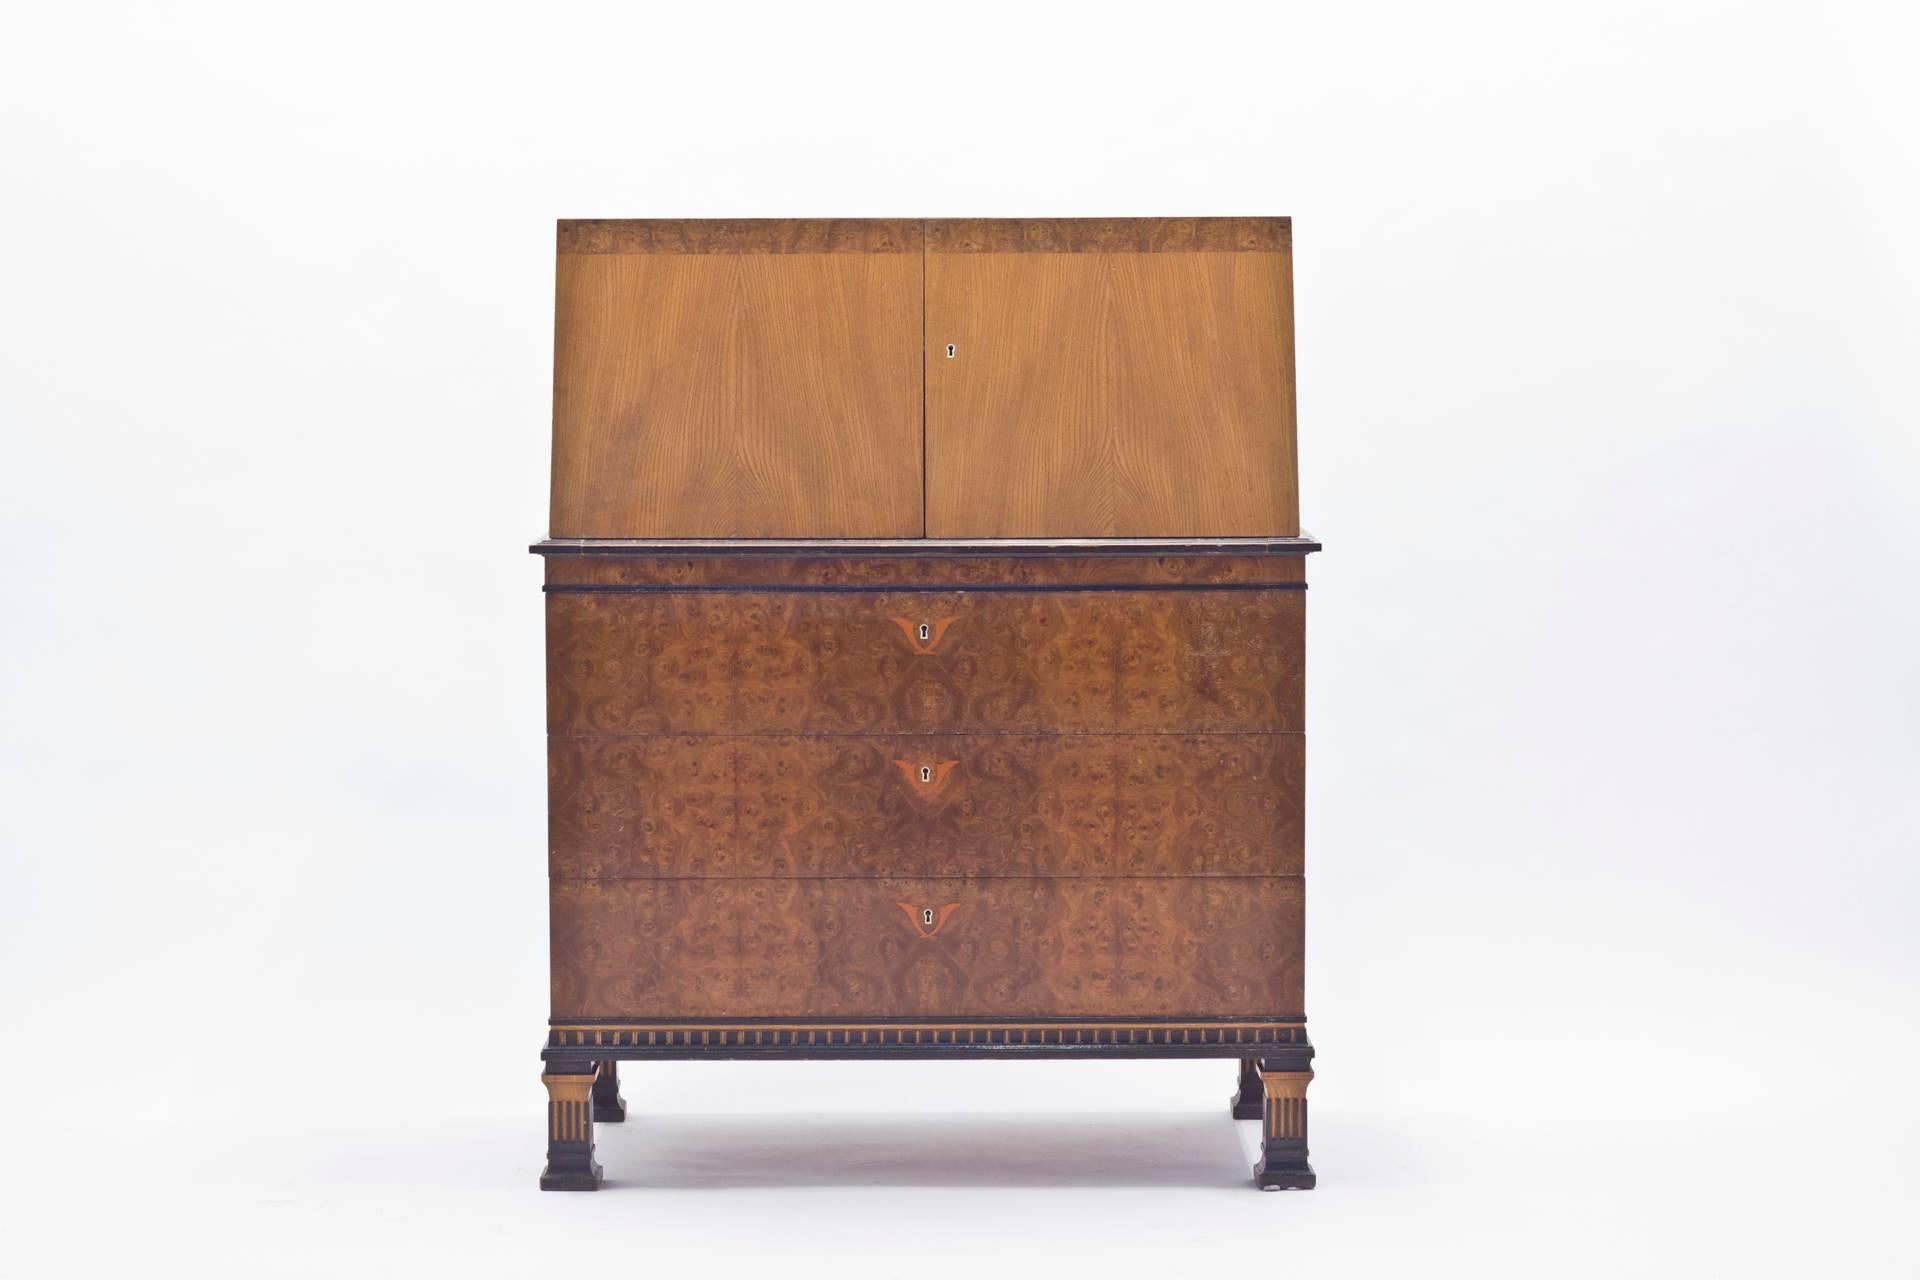 This Swedish grace chiffonier was designed by Erik Chambert during the 1930s for his own company, Chamberts Möbelfabrik. It displays a very high quality of craftsmanship, with a wide variety of different exotic wood inlays. Among those are rosewood,